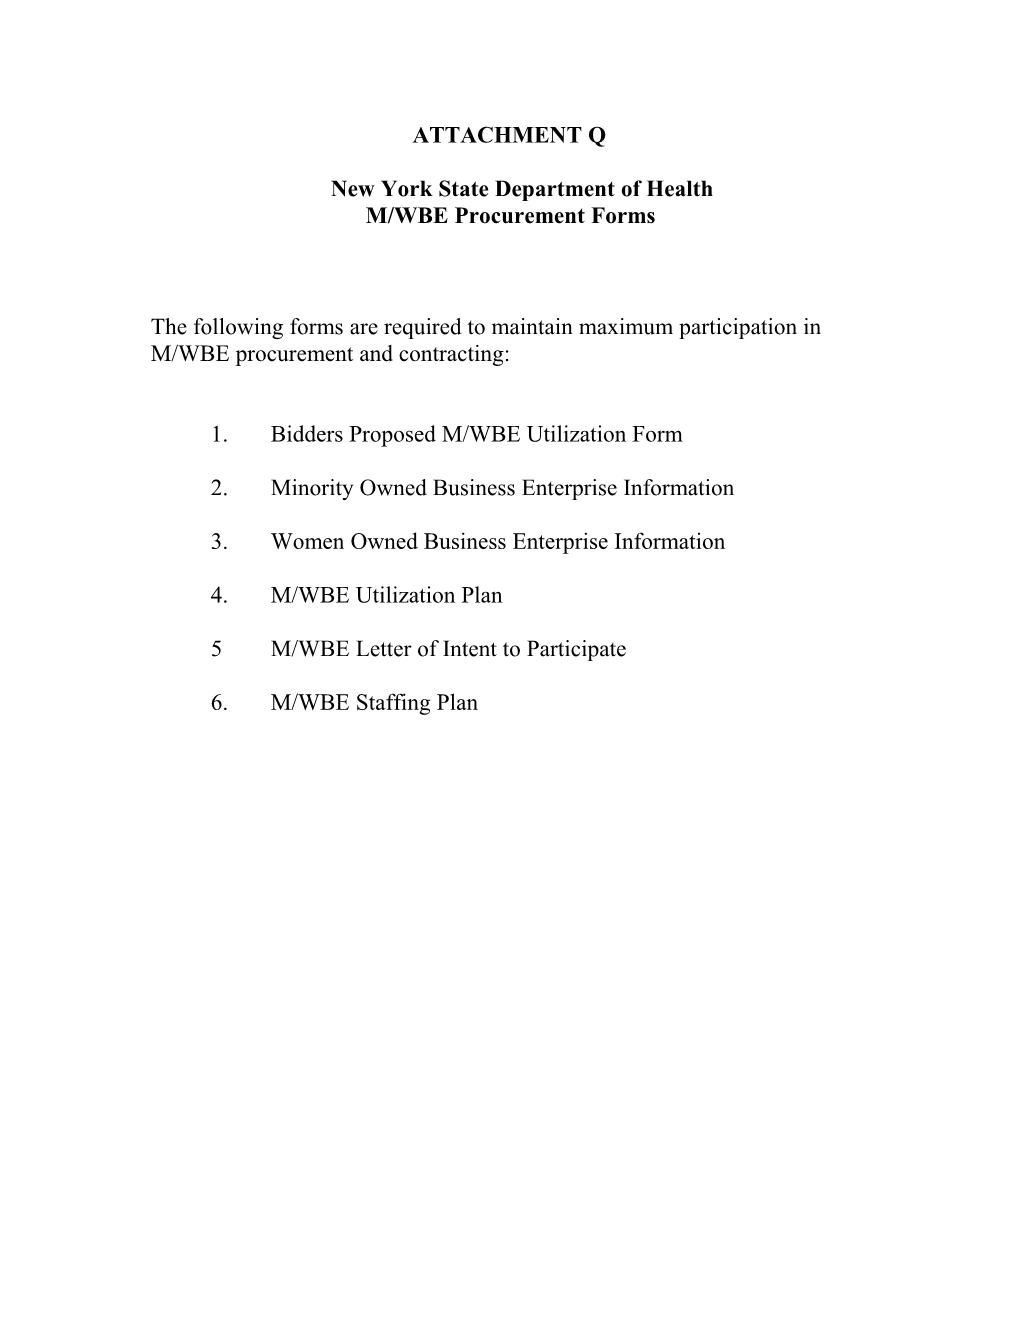 New York State Department of Health s2